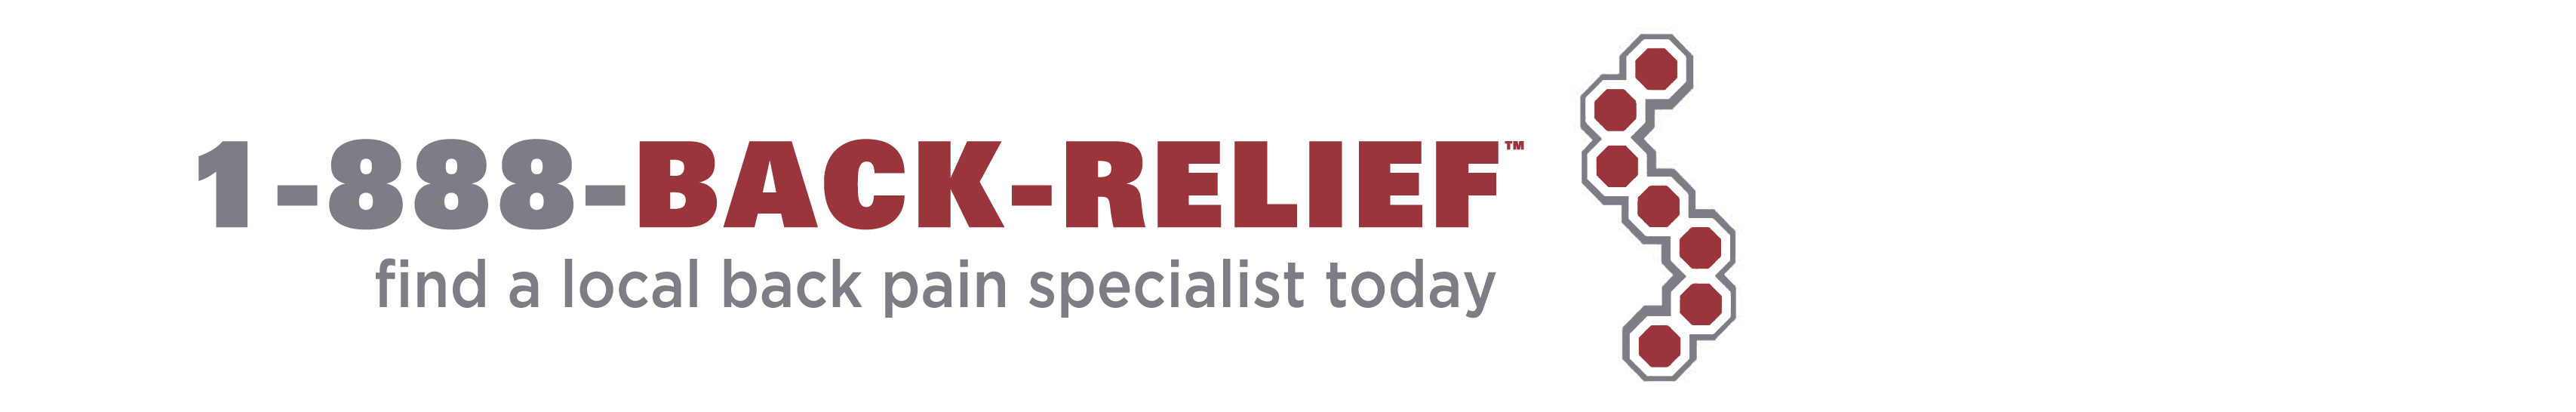 1-888-Back-Relief – Find a local back pain specialist